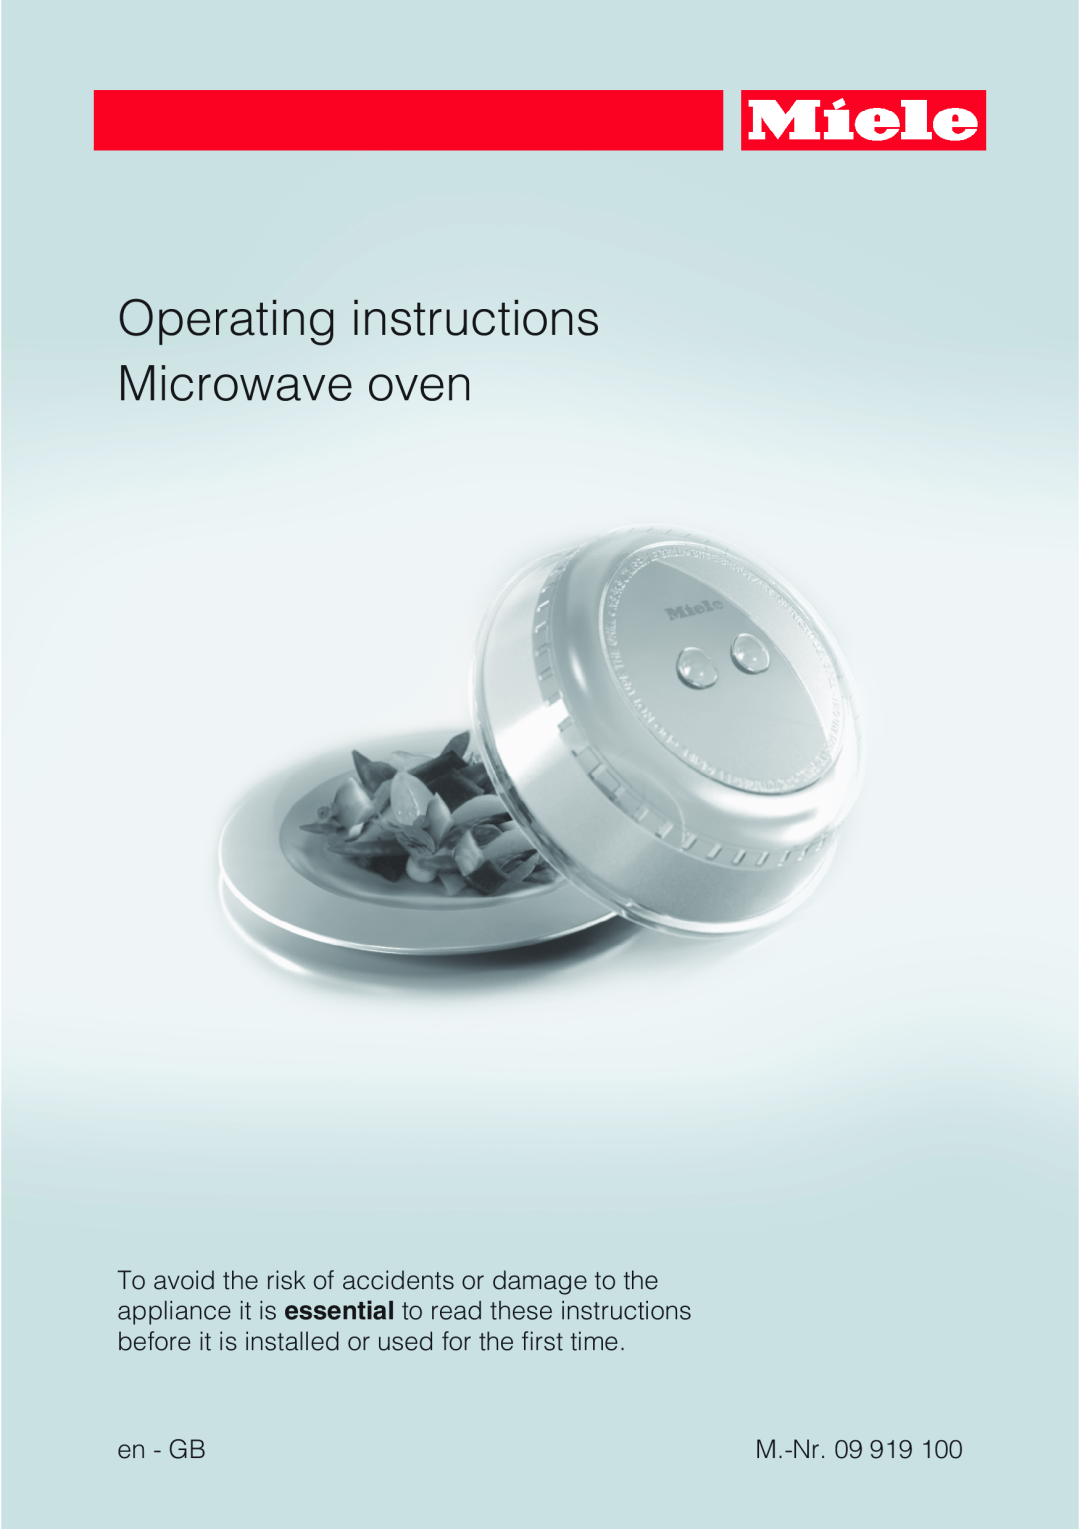 Miele 09 919 100 operating instructions Operating instructions Microwave oven, en - GB, M.-Nr.09 